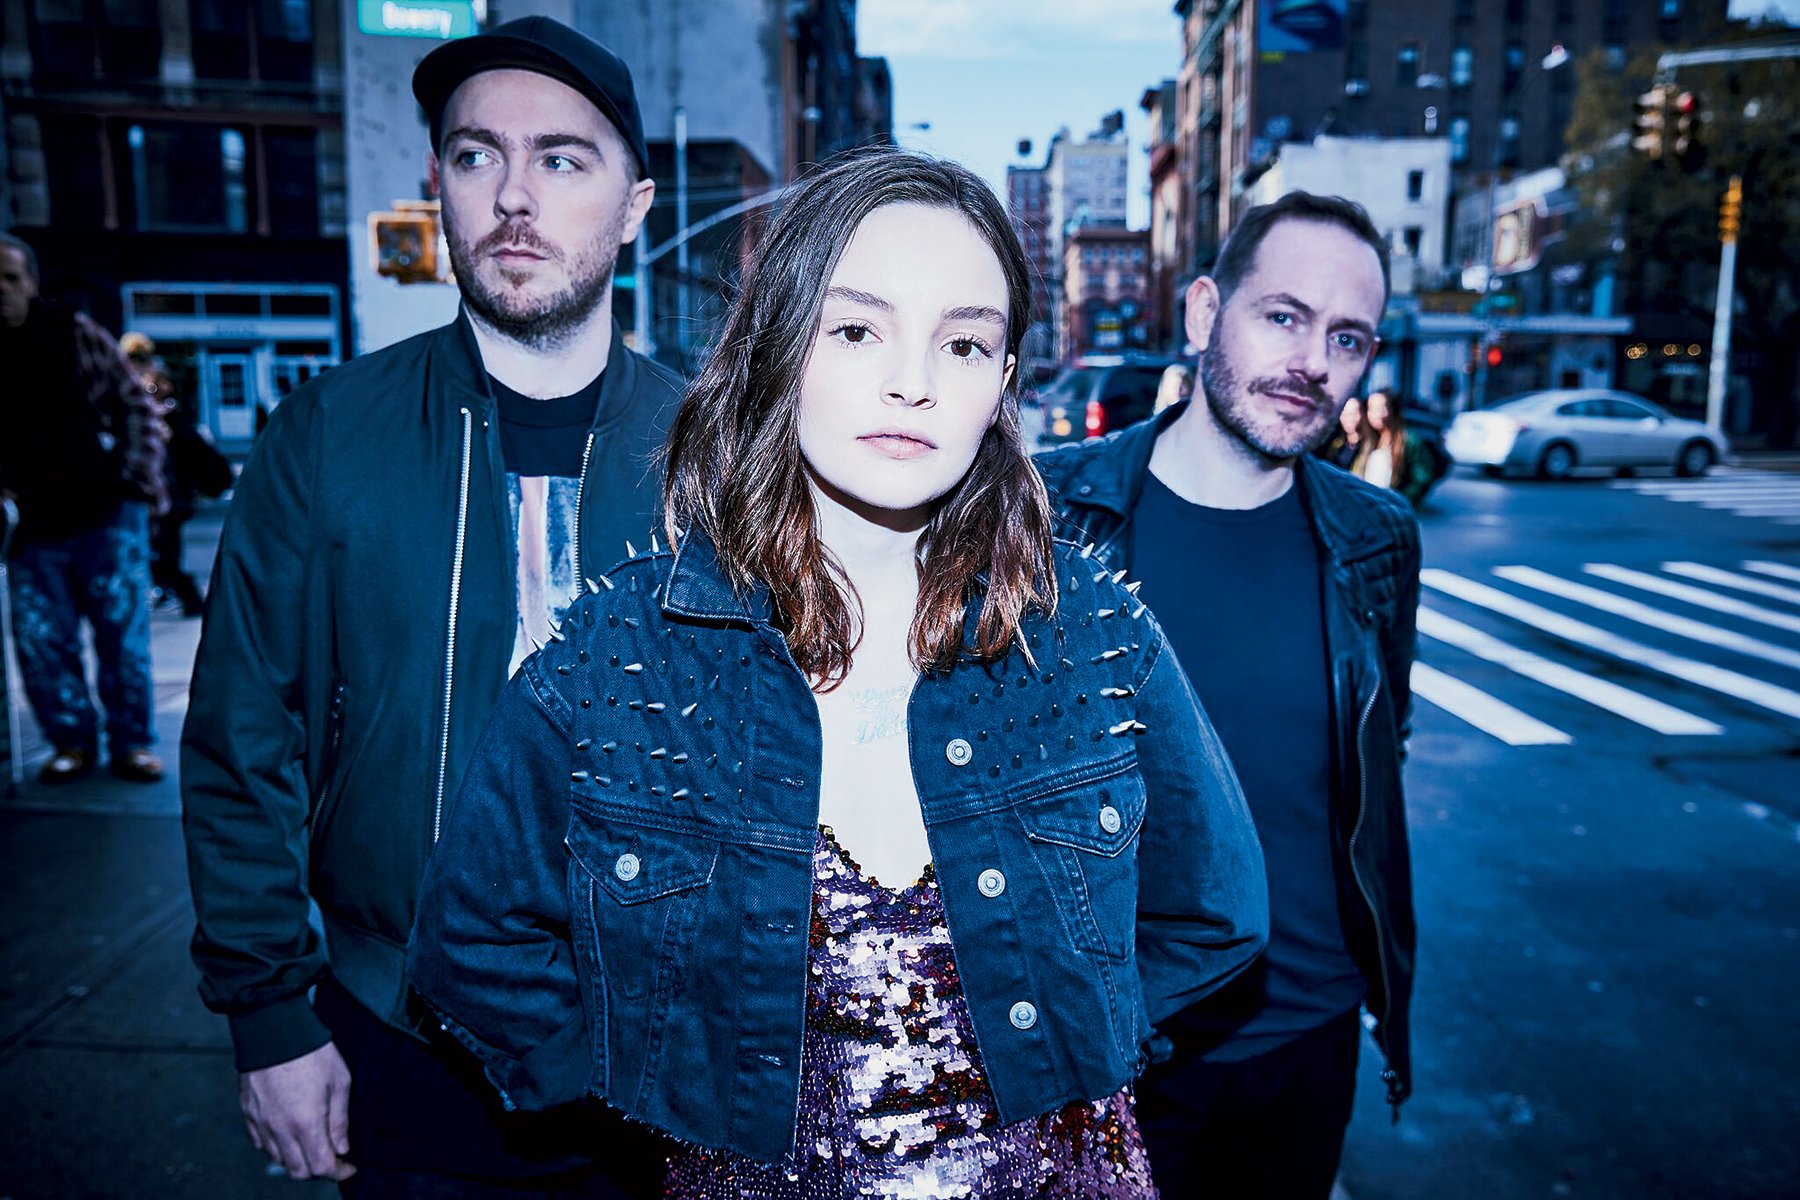 Photograph of Chvrches by Danny Clinch. 